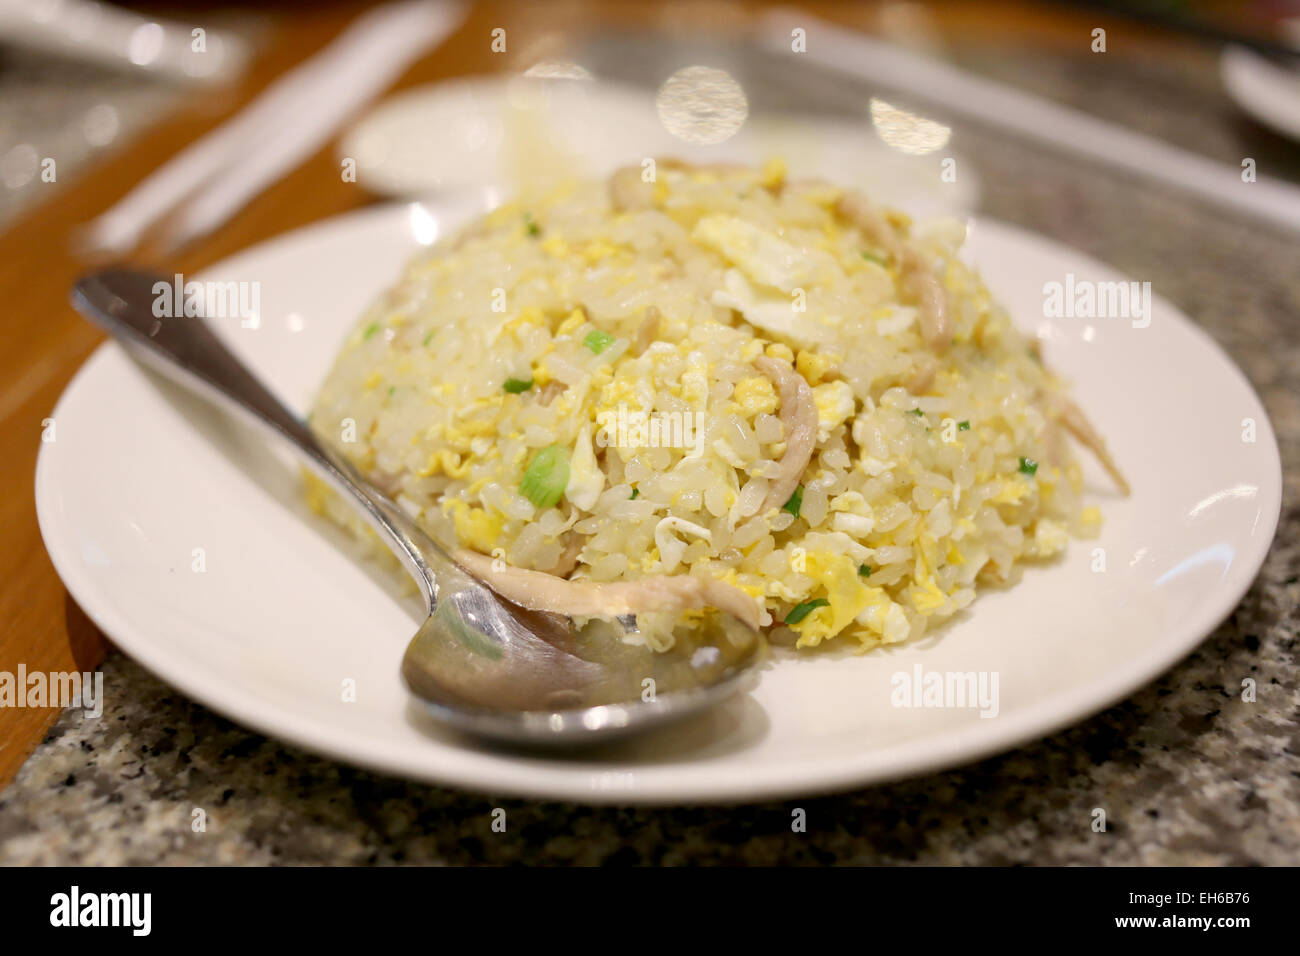 Fried rice on white dish at the restaurant. Stock Photo